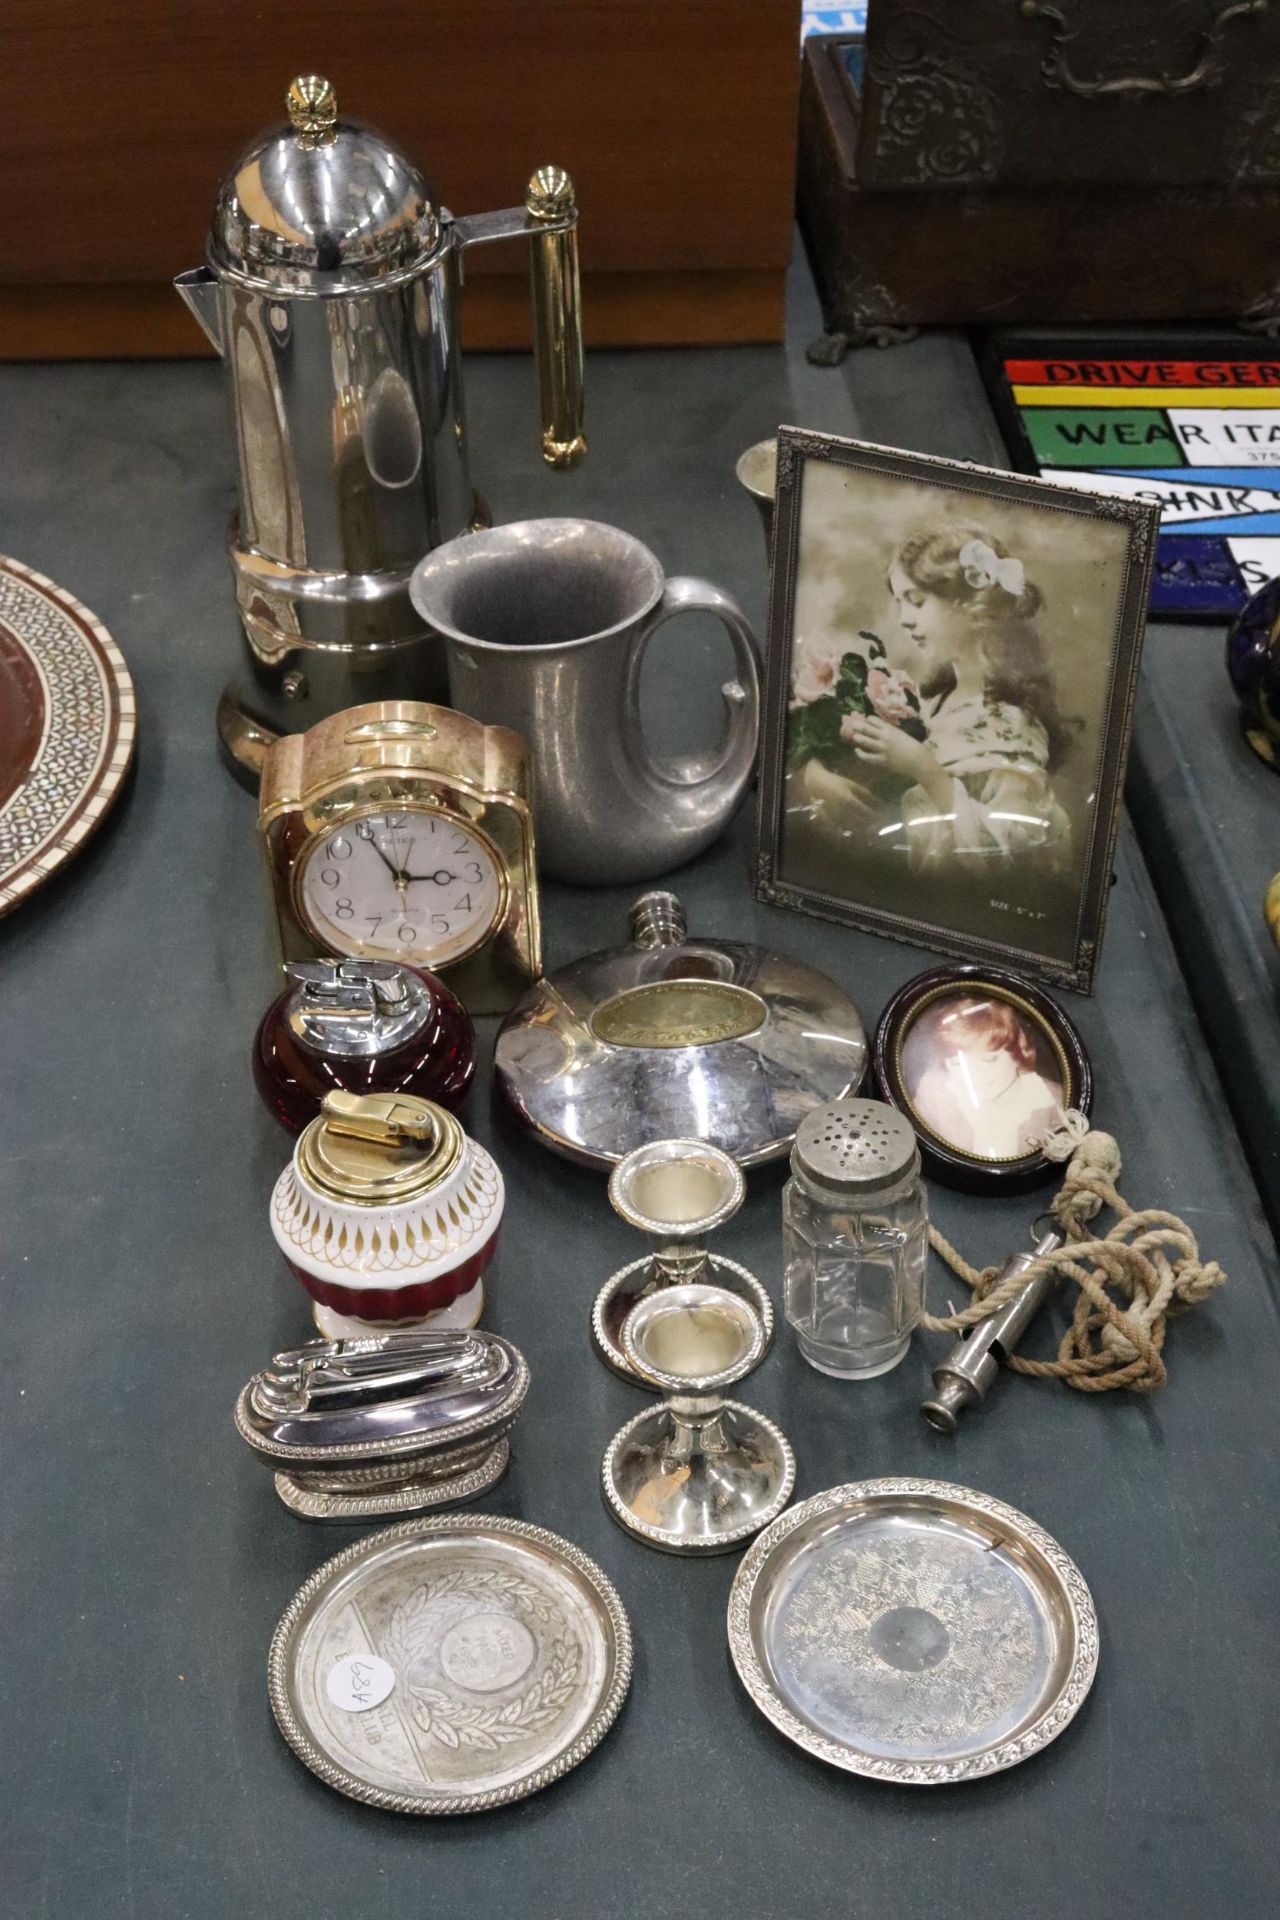 A QUANTITY OF ITEMS TO INCLUDE A CHROME ITALIAN COFFEE POT, TABLE LIGHTERS, CANDLE STICKS, A HIP